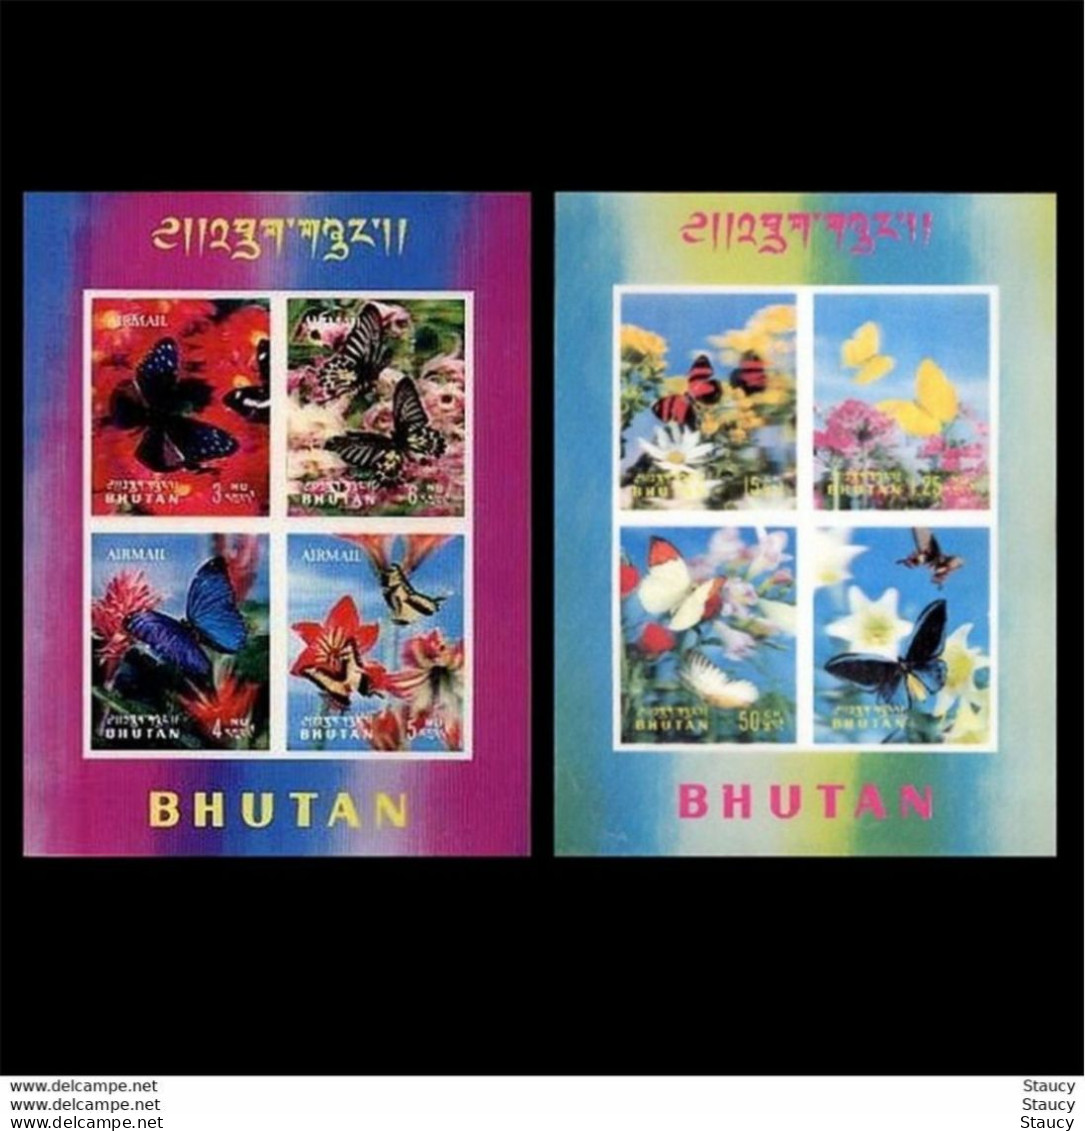 BHUTAN Bhutan 1968 Butterflies - 3d  Unique Stamp Imperf, Complete 8v Set + 2 Miniature Sheets MNH, As Per Scan - Oddities On Stamps